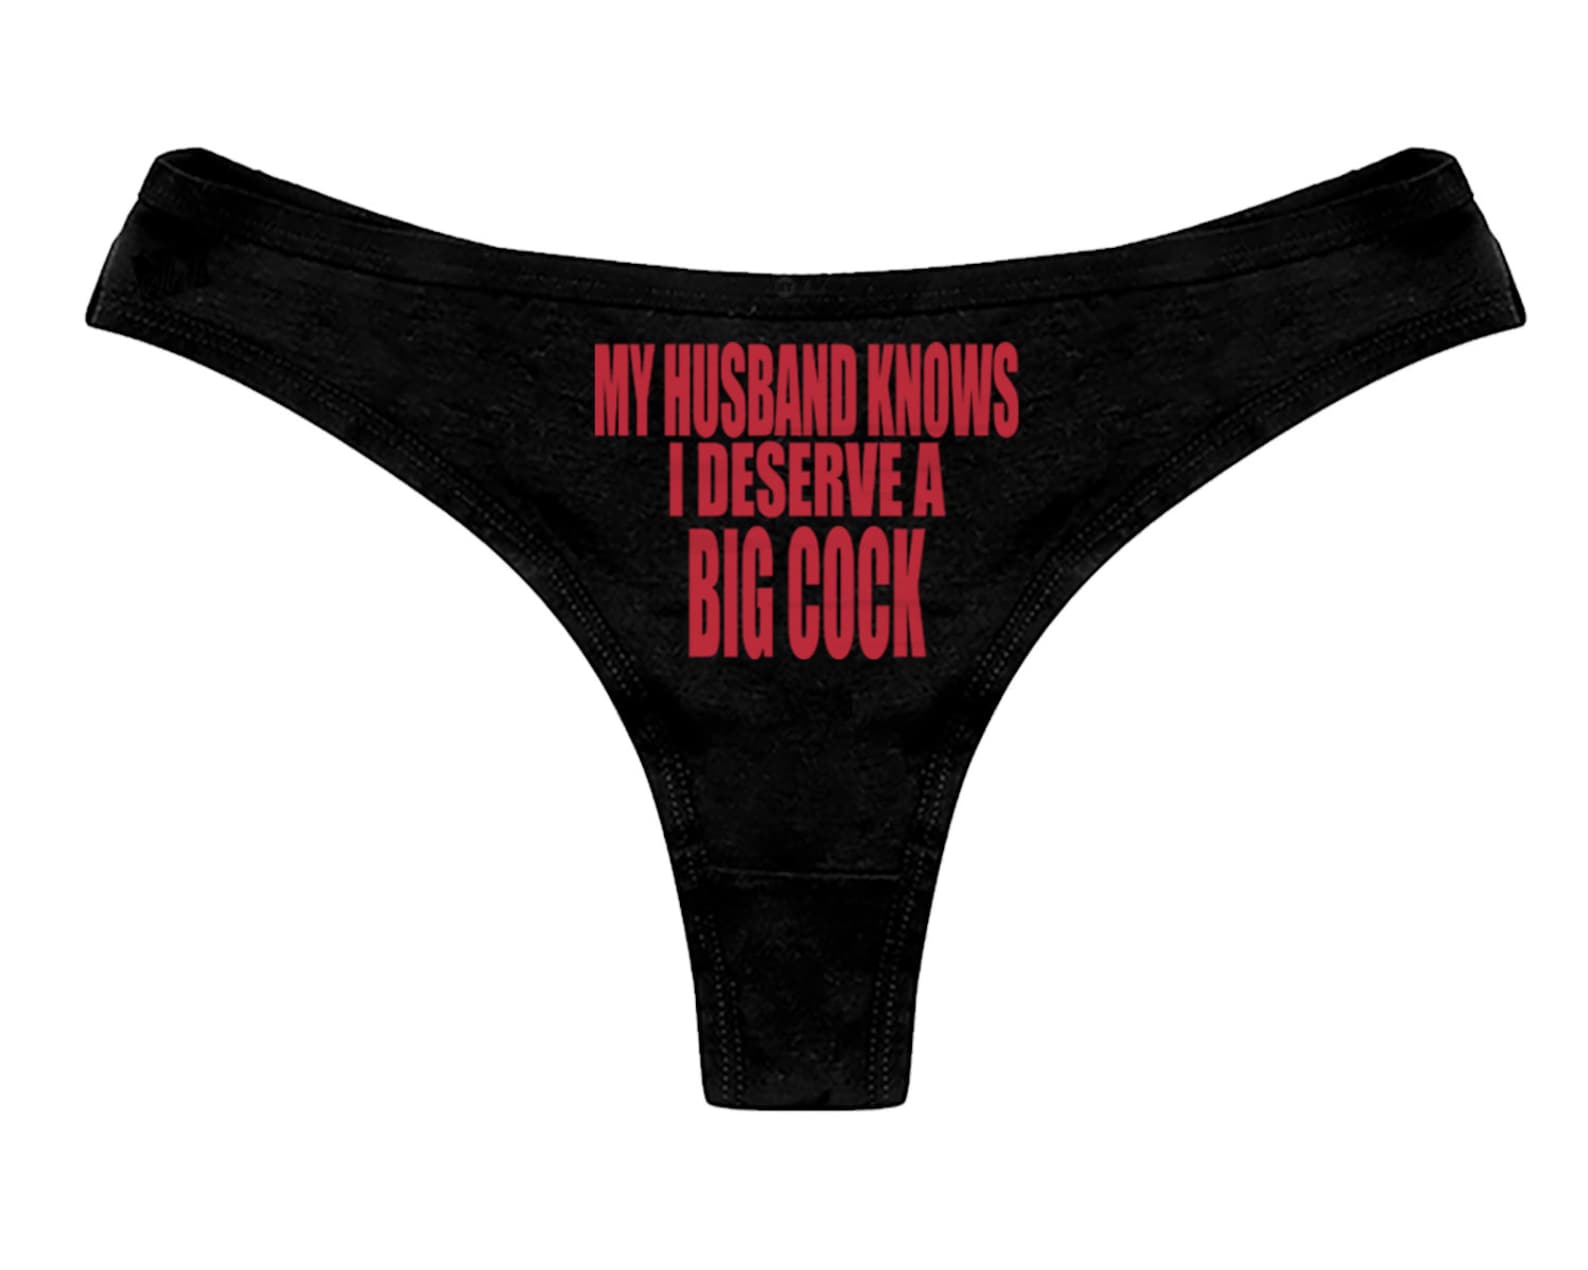 My Husband Knows I Deserve A Big Cock Panties Cuckold Hotwife Etsy